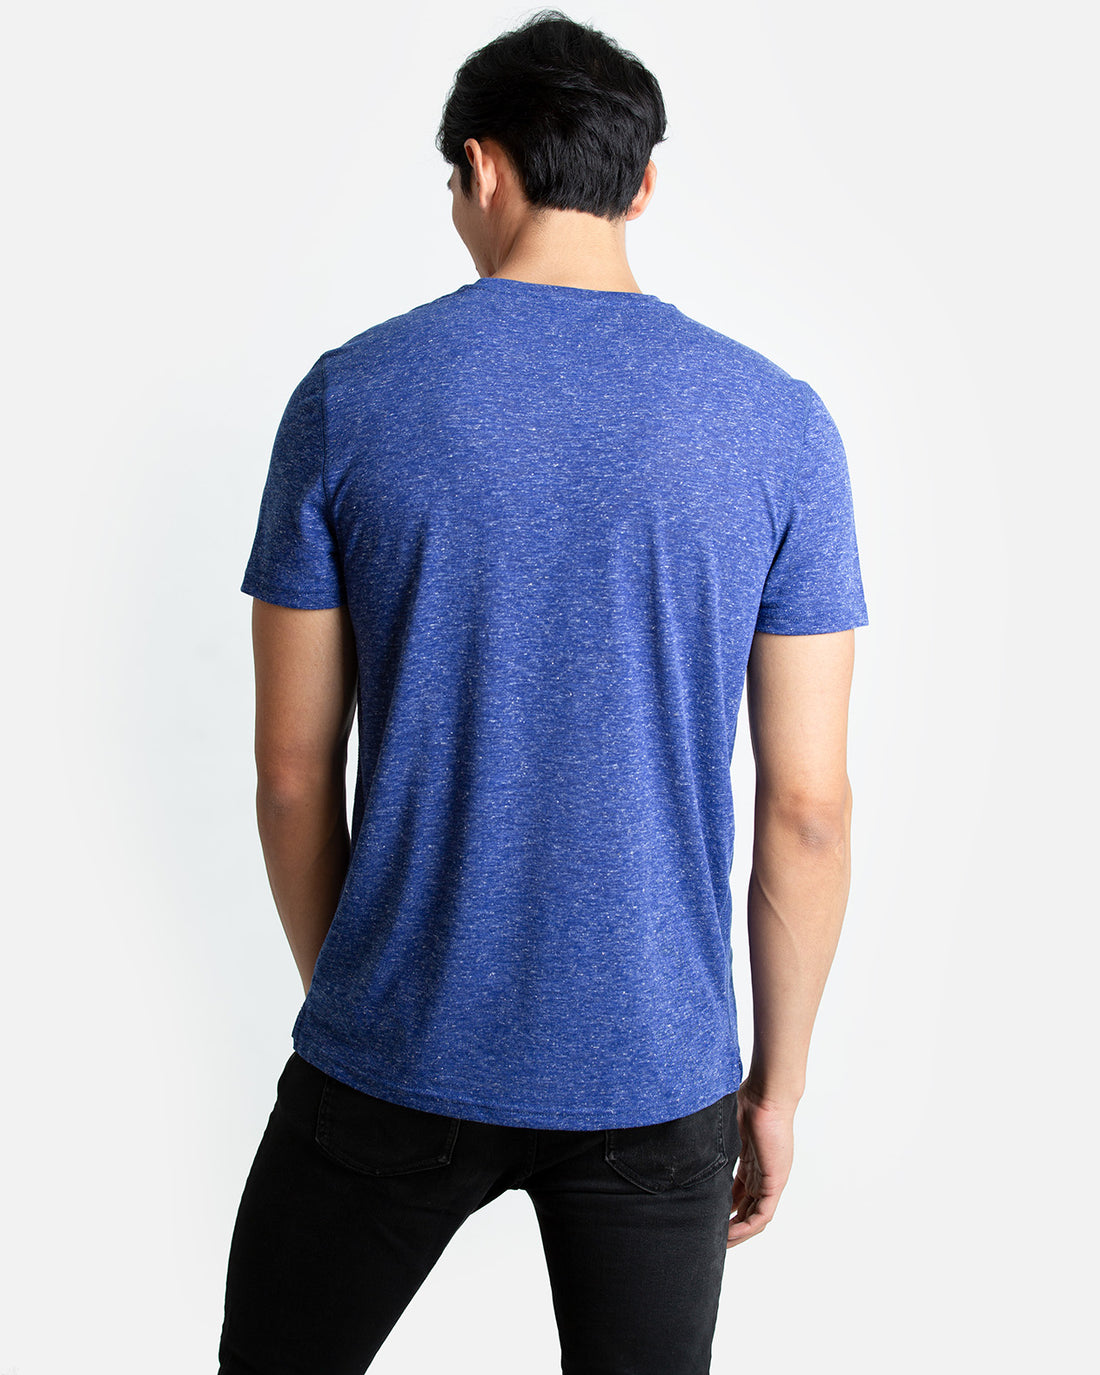 S/S Speckled Crew Neck T-Shirt